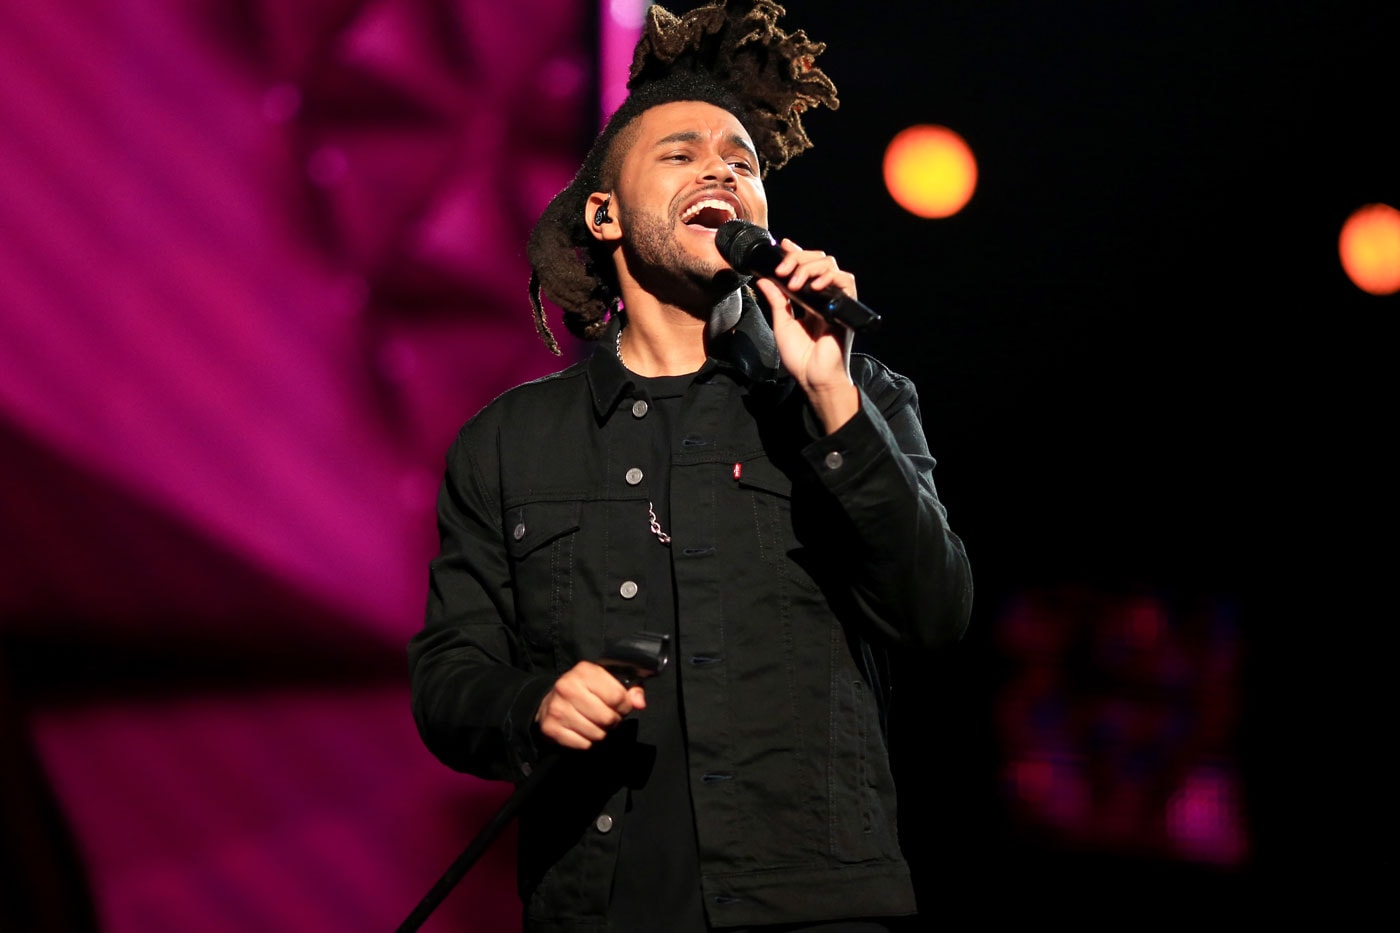 The Weeknd Lands First No. 1 Record With “Can’t Feel My Face”